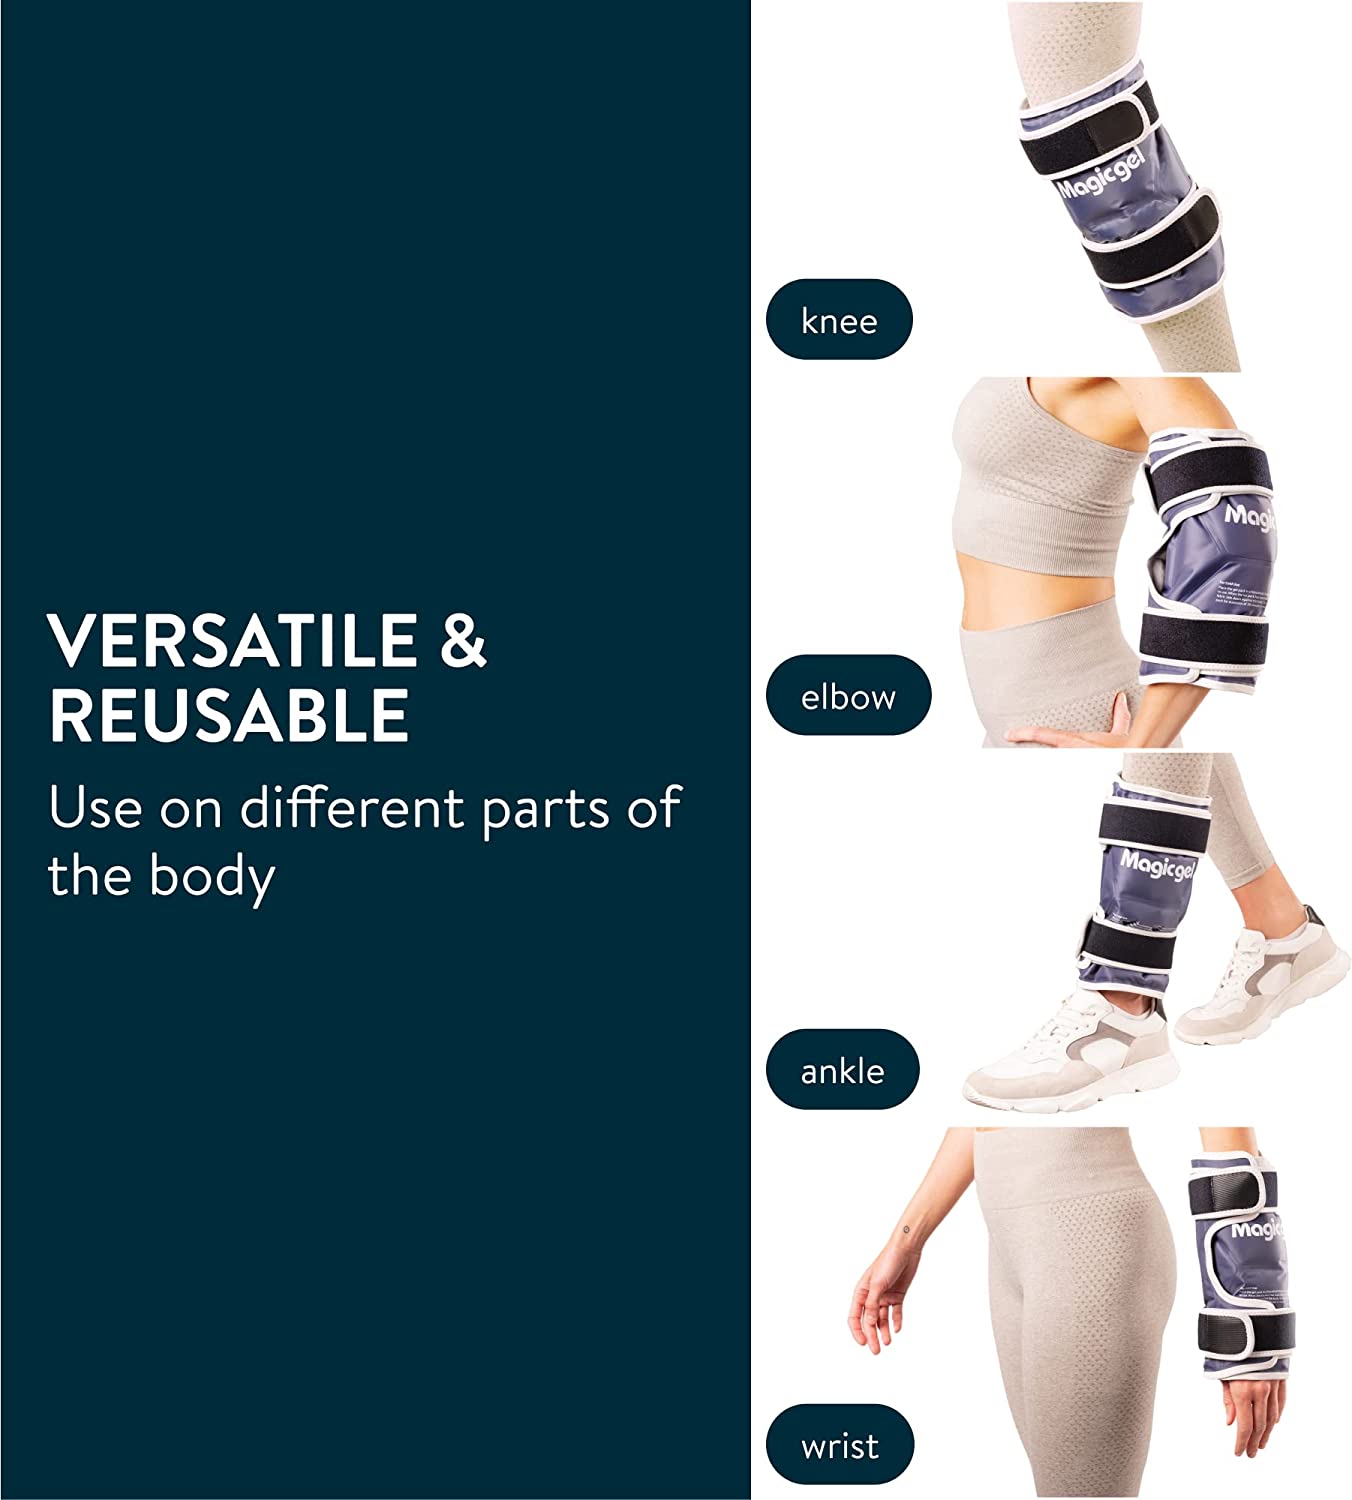 Premium Knee Ice Pack with Professional Wrap